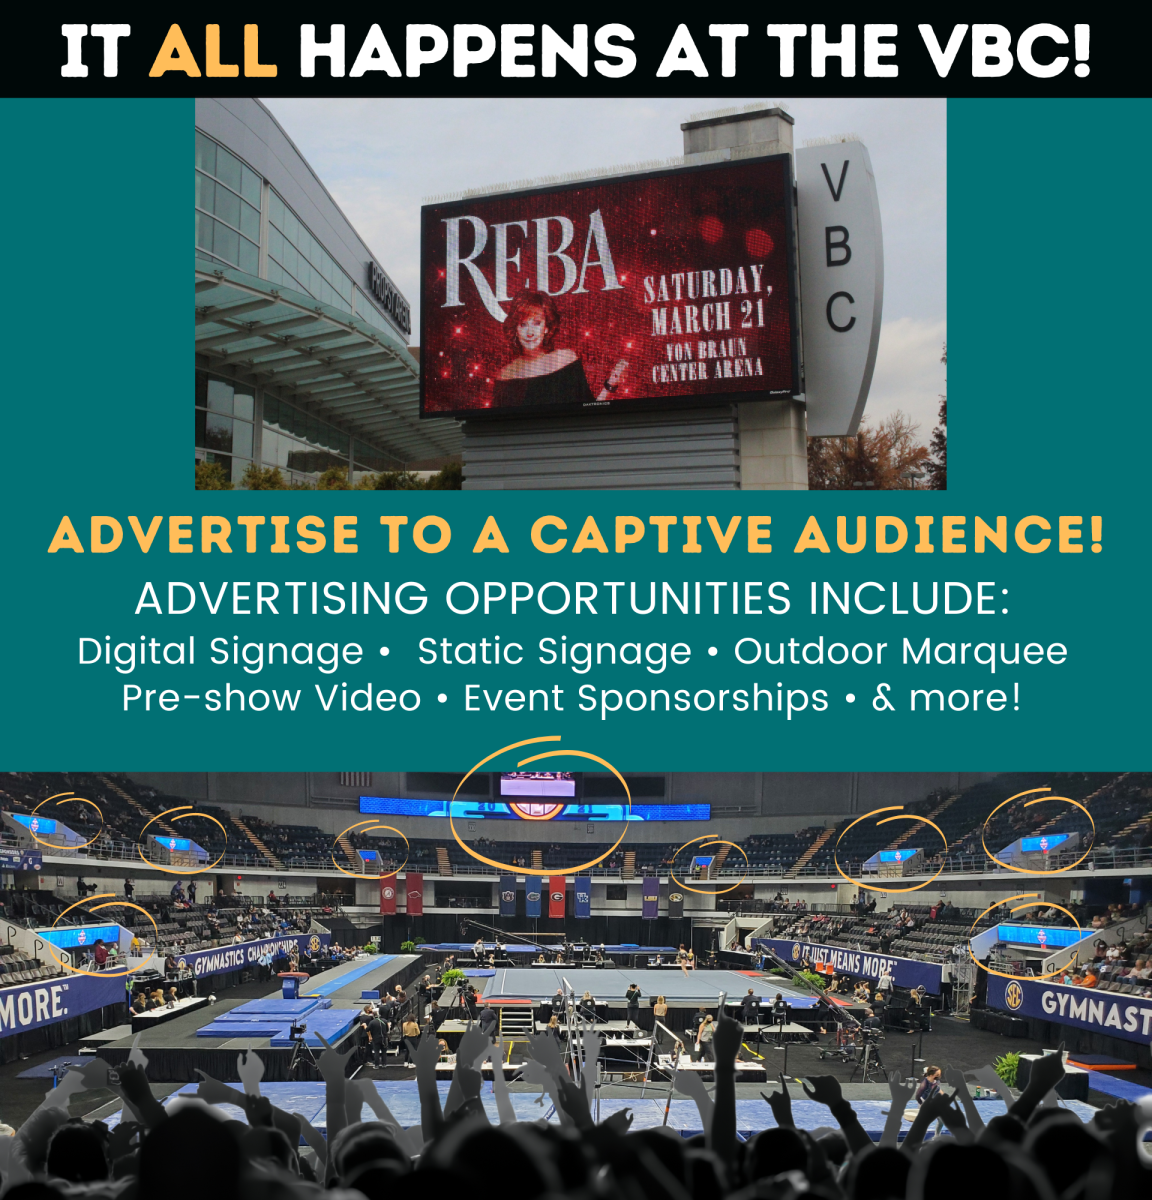 It all happens at the VBC - advertise to a captive audience!